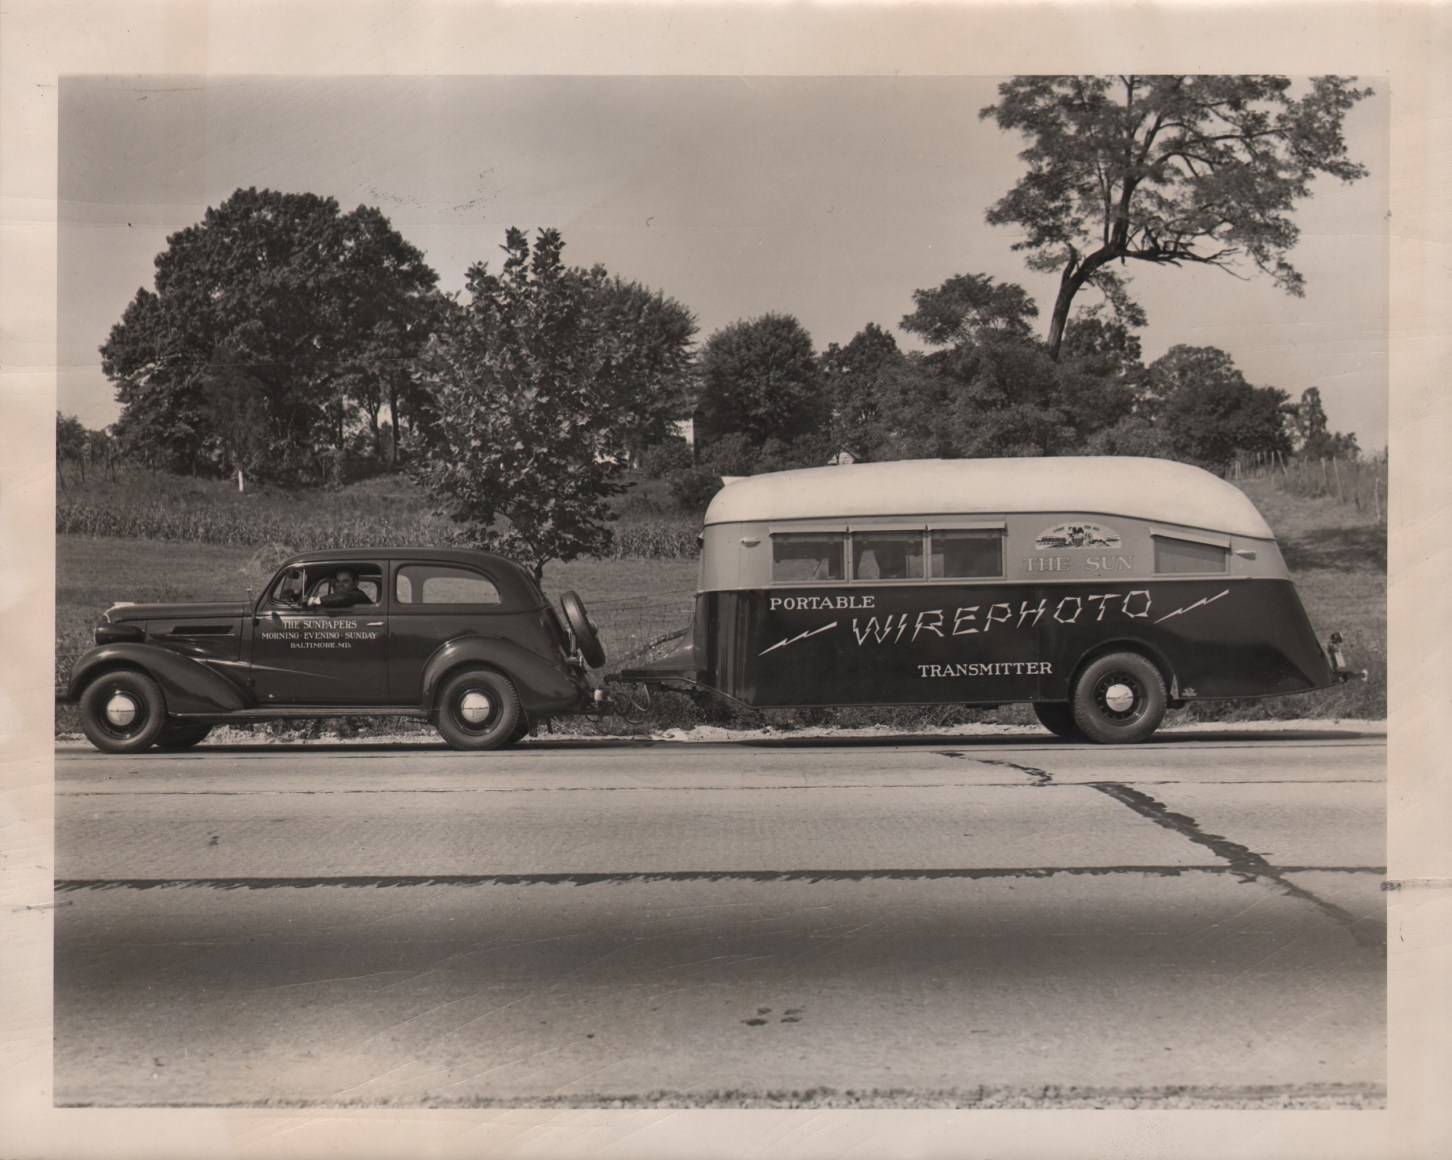 45. Sun Wire Photo, Sun Wire Photo Trailer, ​October 7, 1937. A car tows a trailer marked &quot;Portable wire photo transmitter&quot;